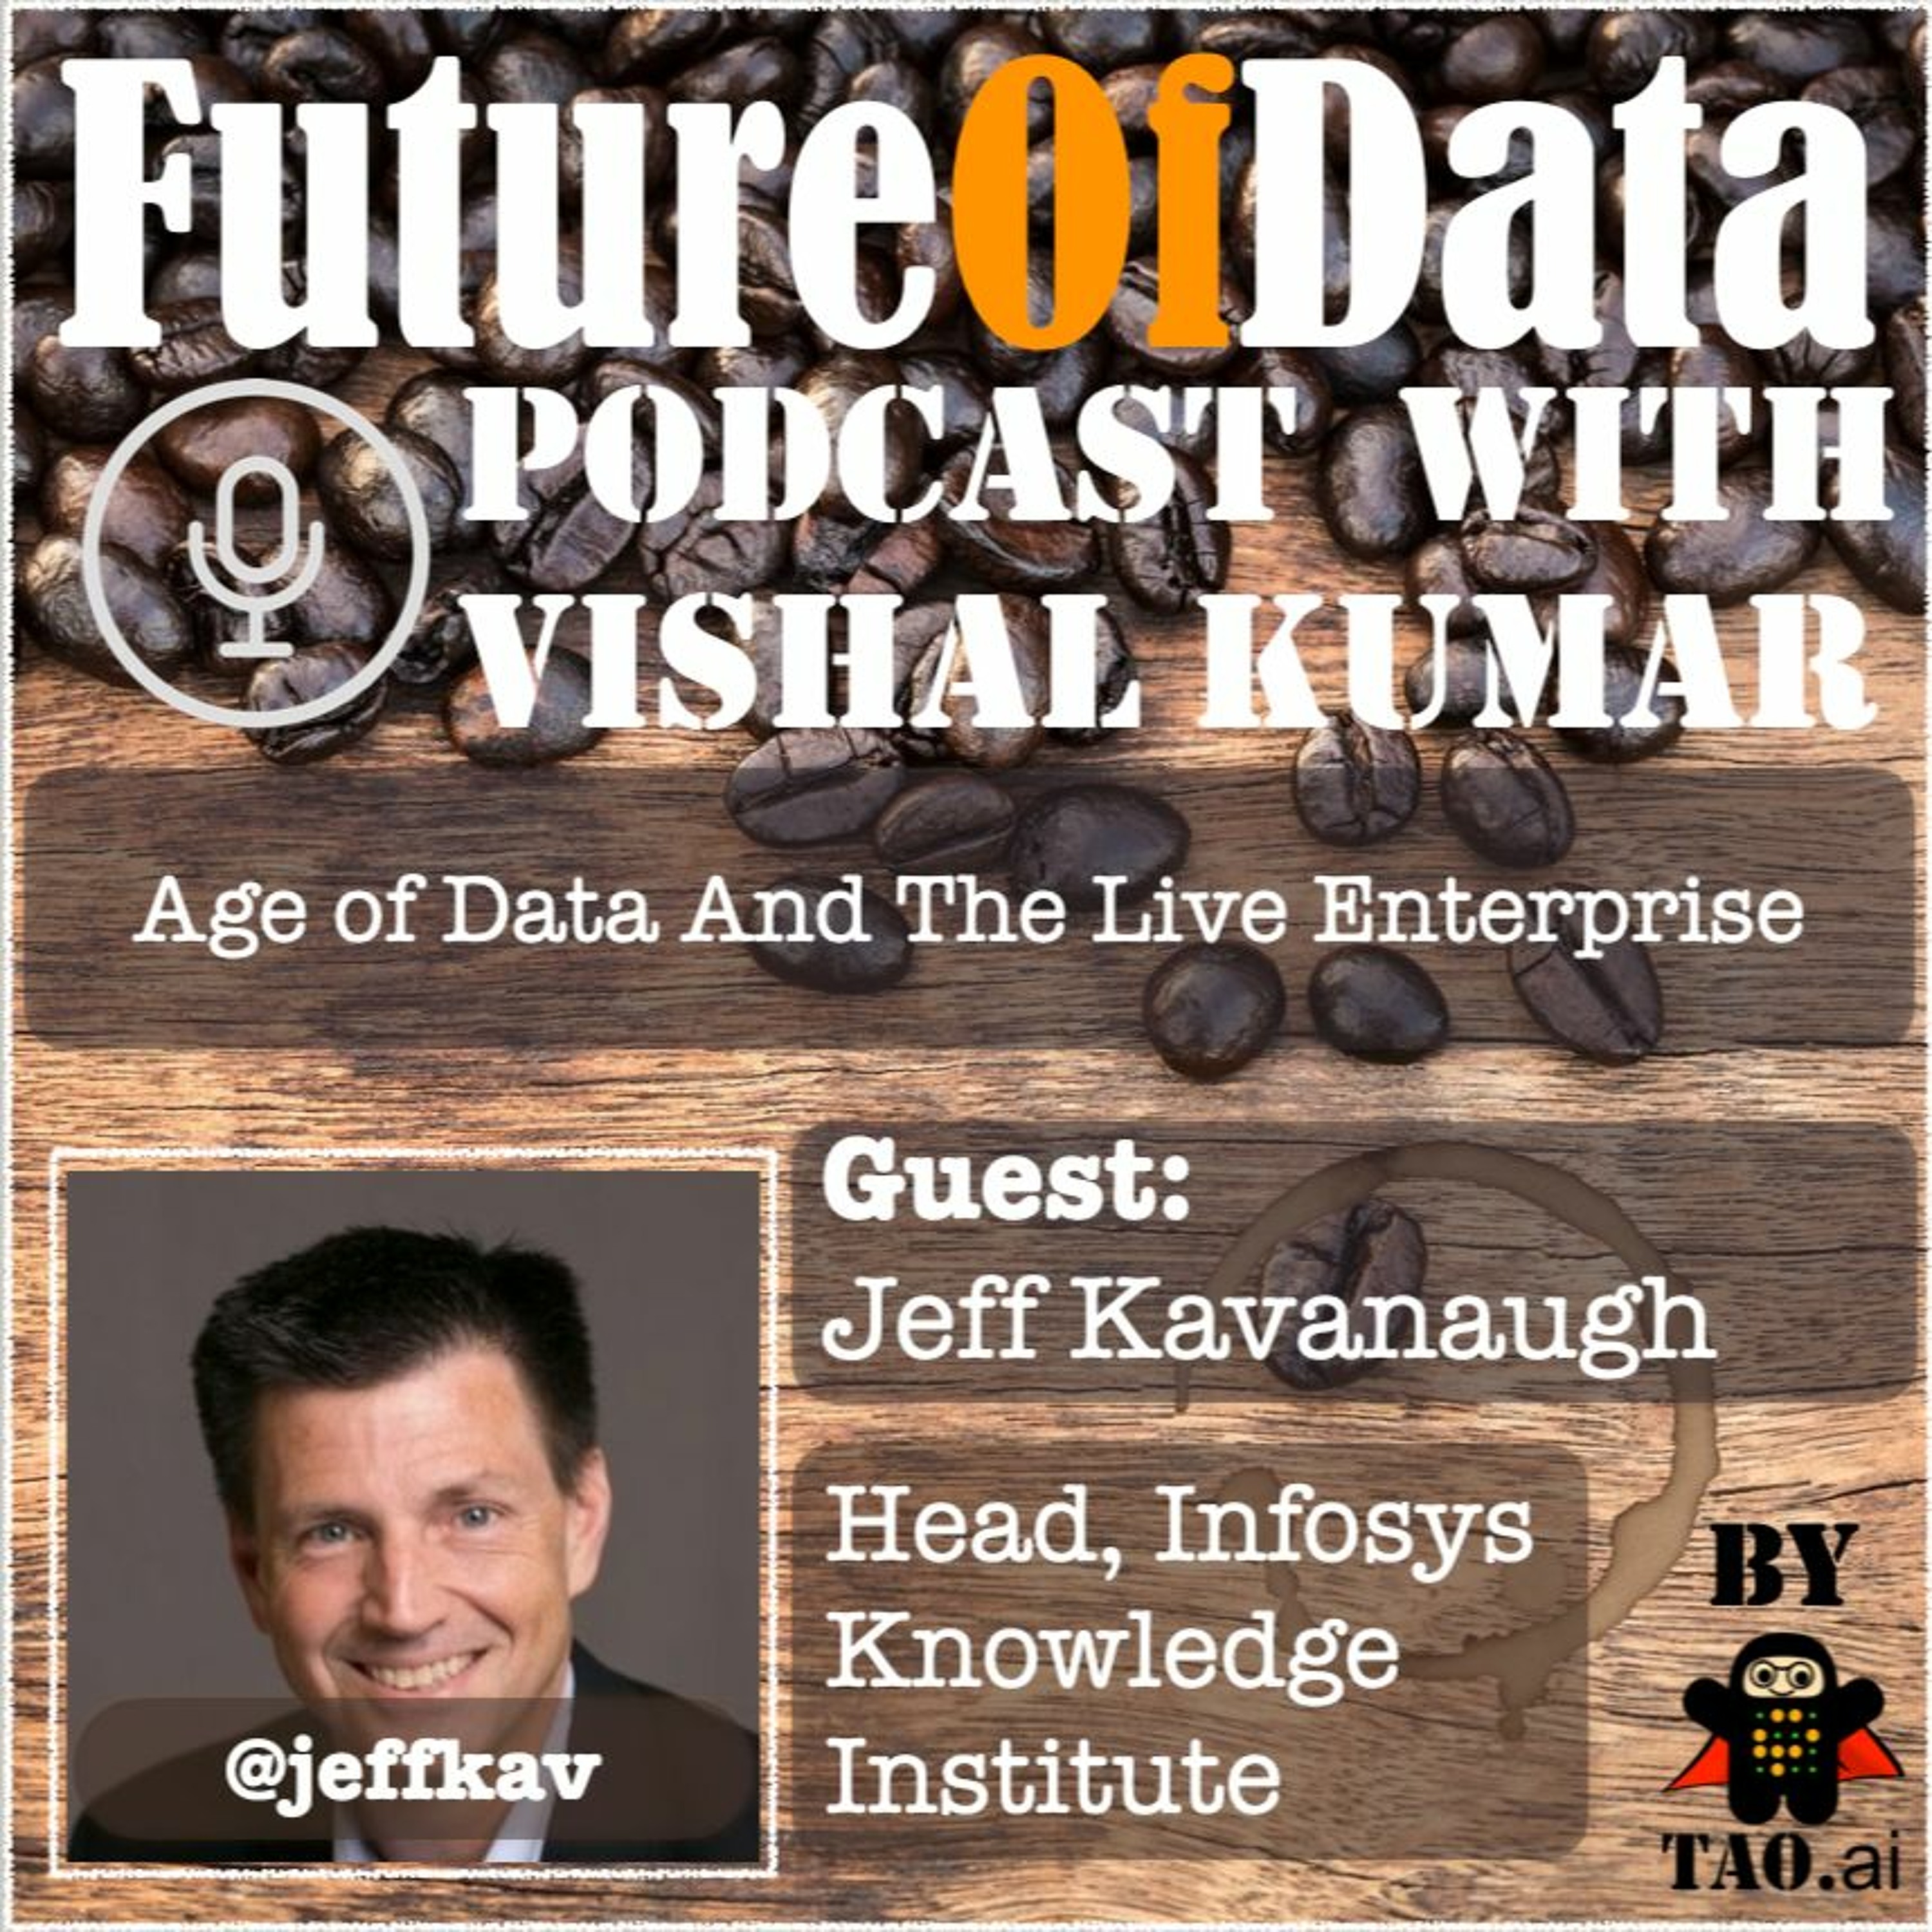 Age of data and the live enterprise